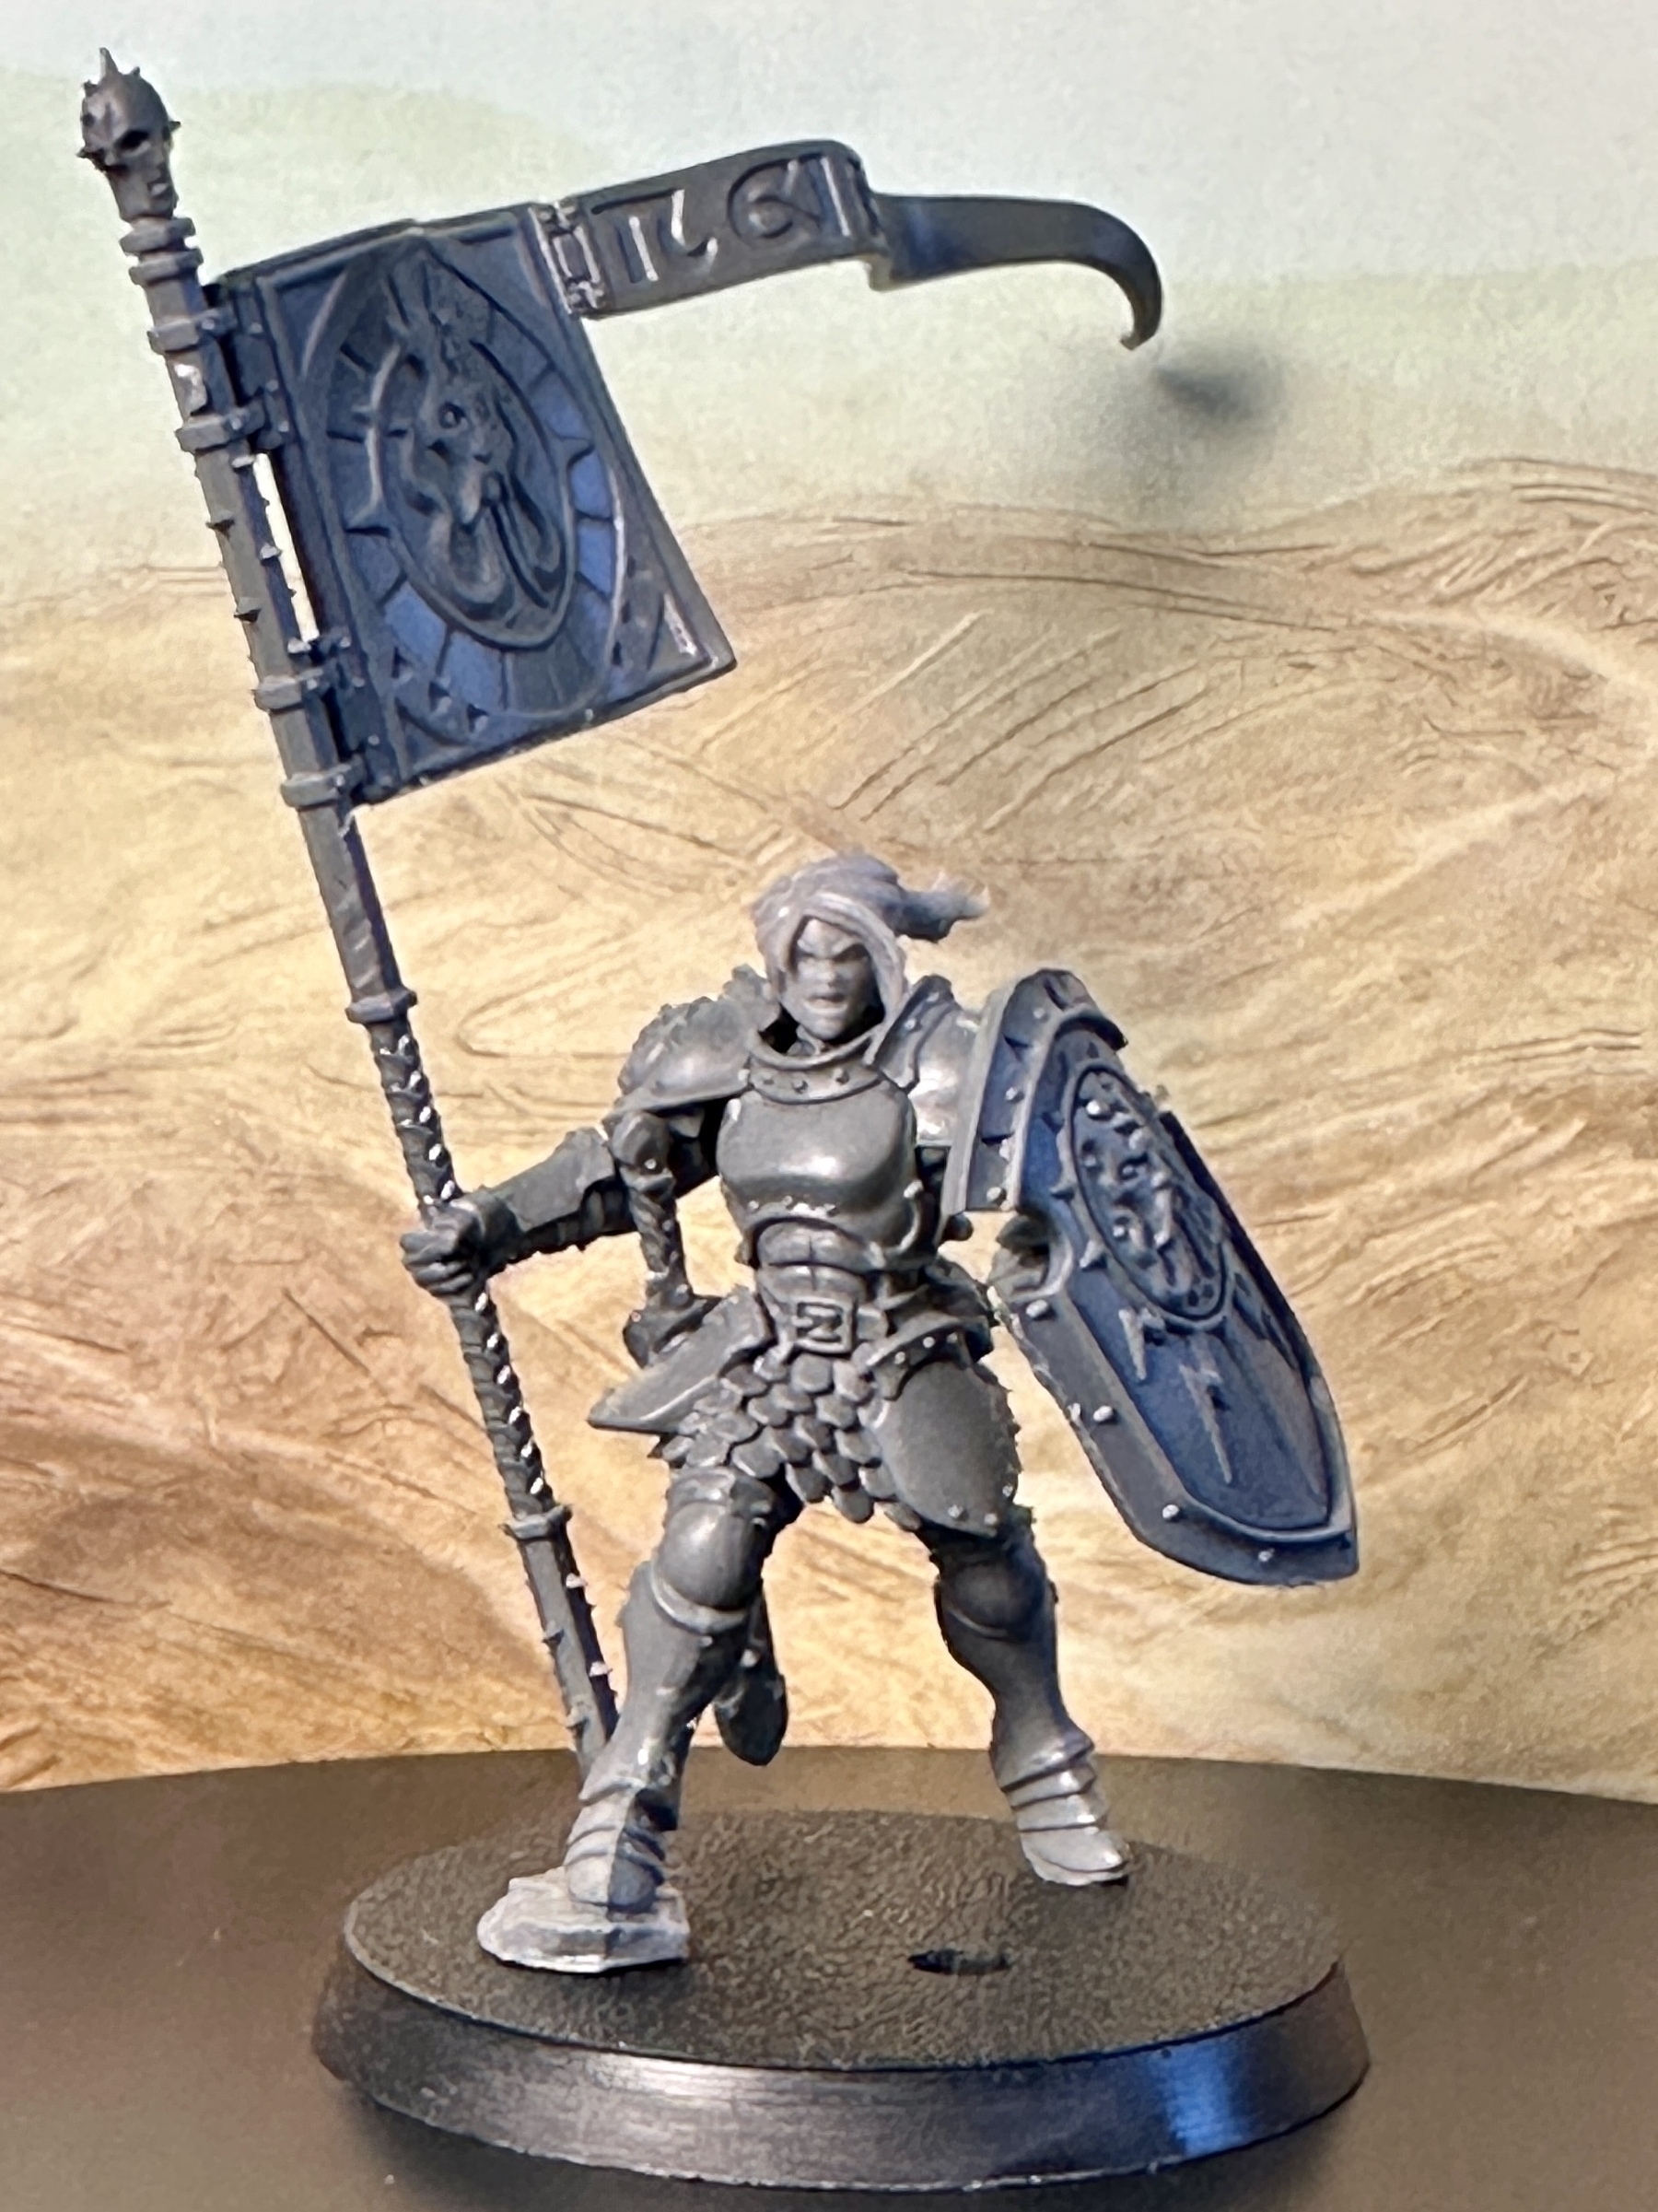 A converted Stormcast Eternals Vindictor miniature. Its spear has been replaced with a banner, and the head has been replaced with a 3D printed alternative. It has been posed dramatically, as if the banner and hair are blowing in the wind